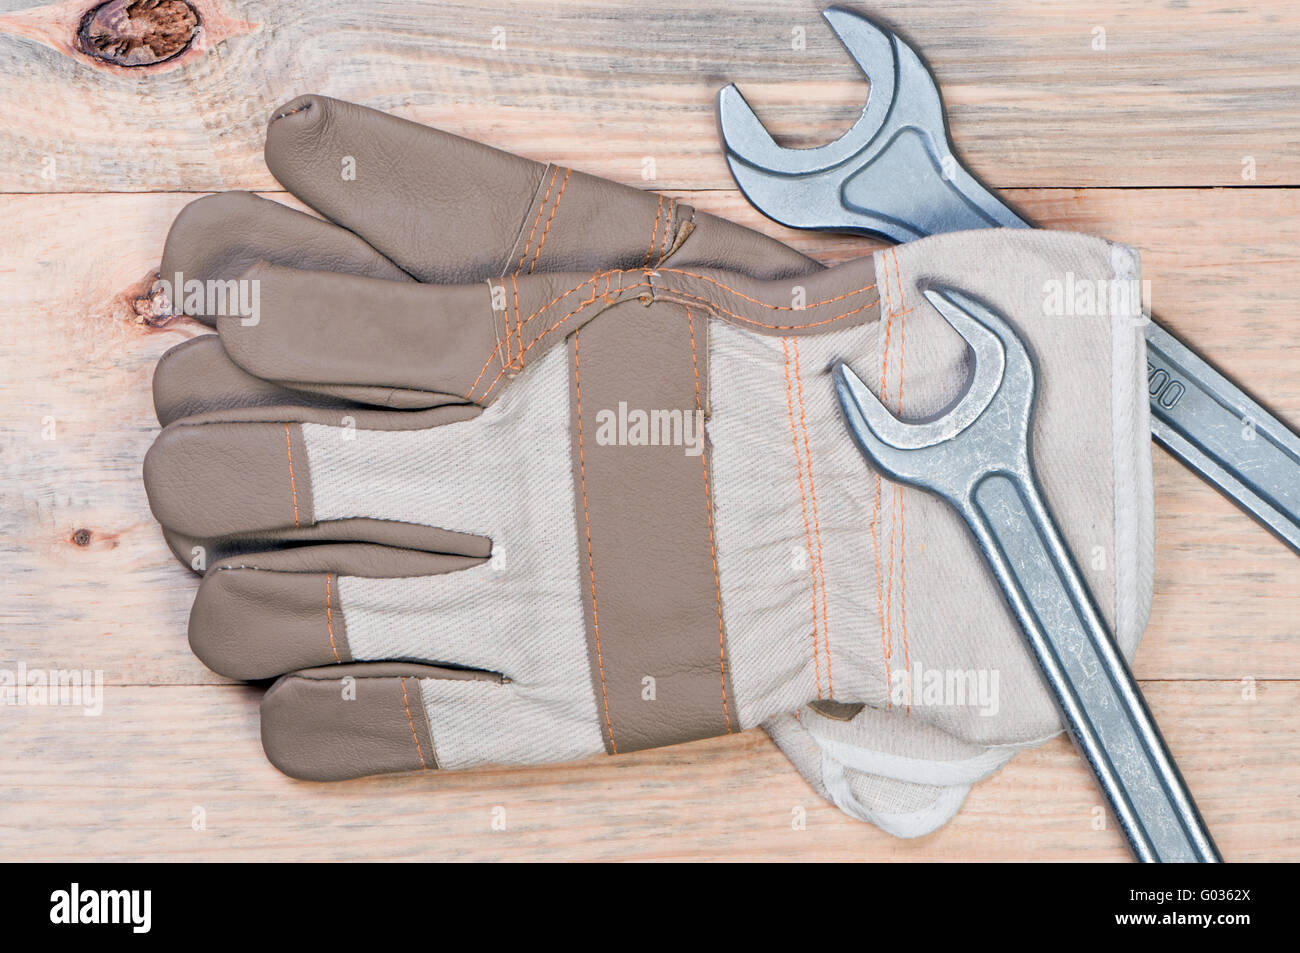 Work gloves and wrenches on wooden background. Stock Photo